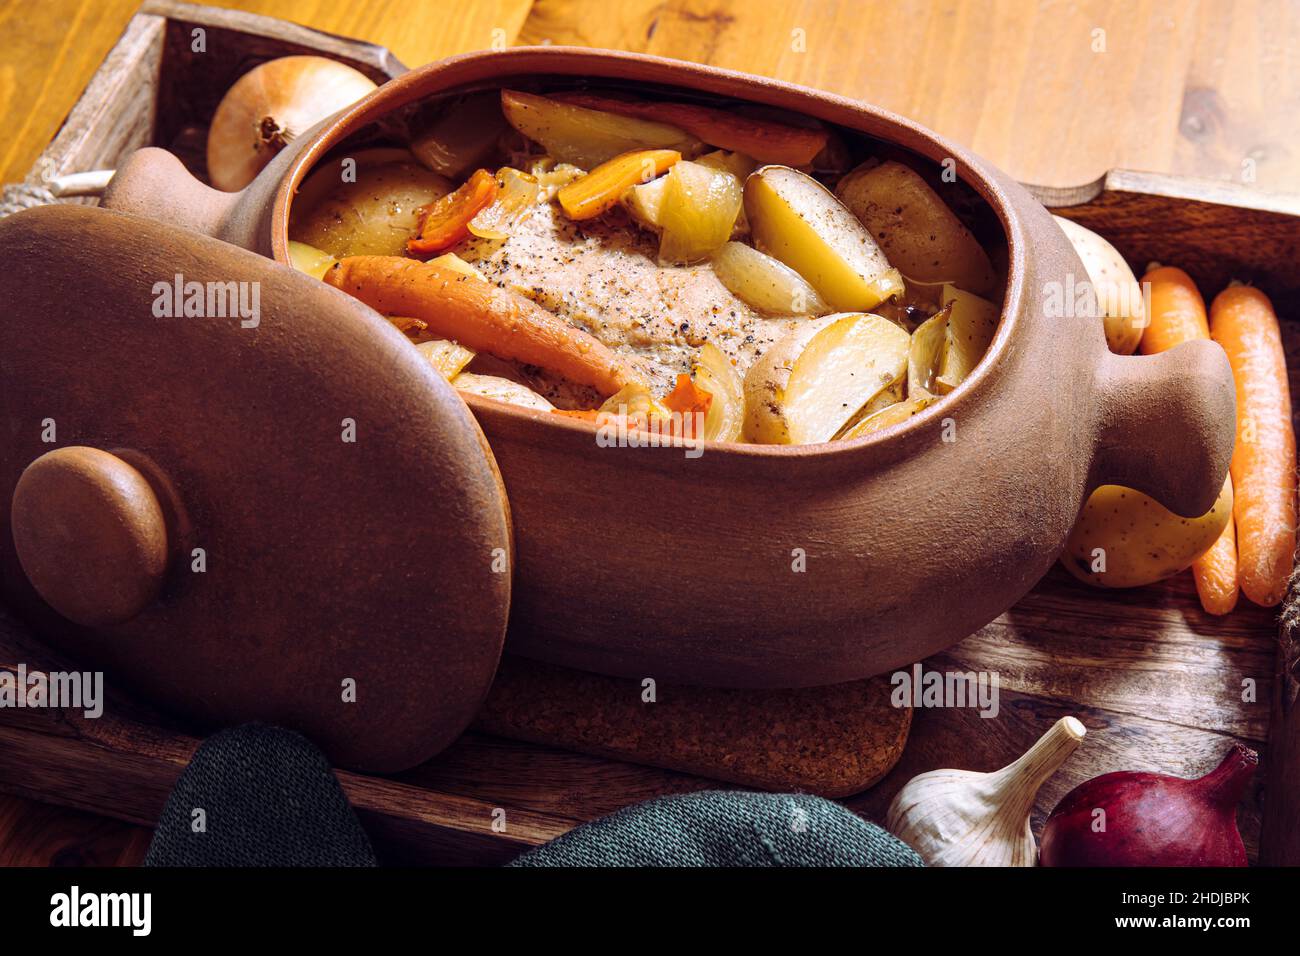 Side view of terracotta clay cooking pot with slow cooked pork roast and vegetables inside on wood tray and wooden table, surrounded by raw organic. Stock Photo